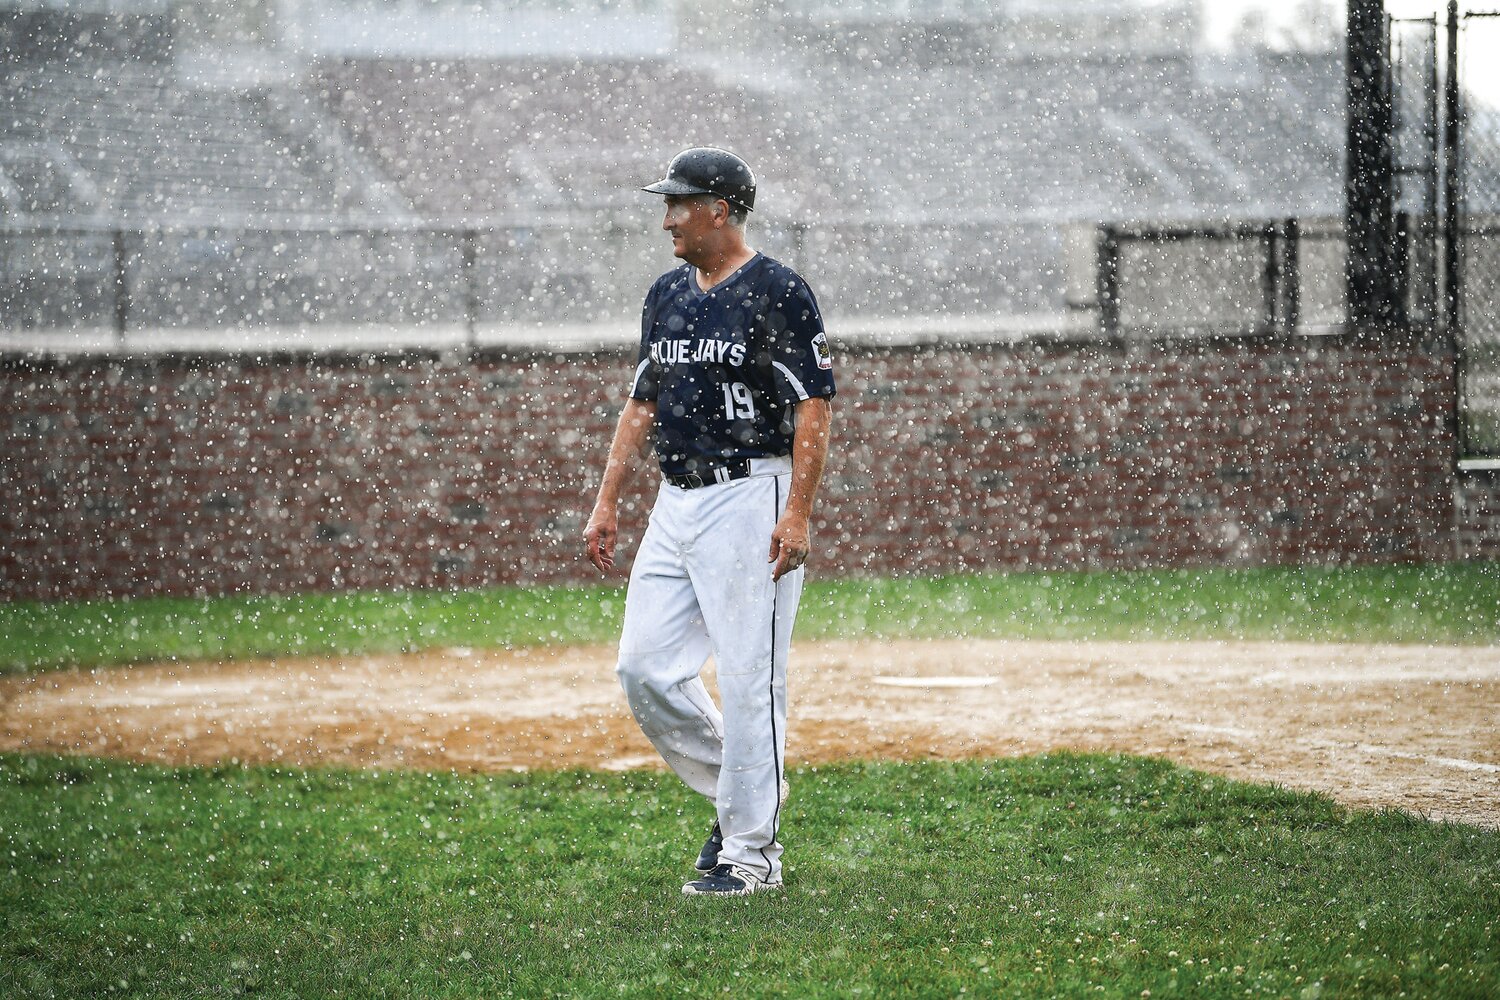 Quakertown manager Bob Helm casually walks off the field as the storm intensifies, resulting in a suspended game at 0-0 in the bottom of the second inning Monday. The game was resumed Wednesday night.